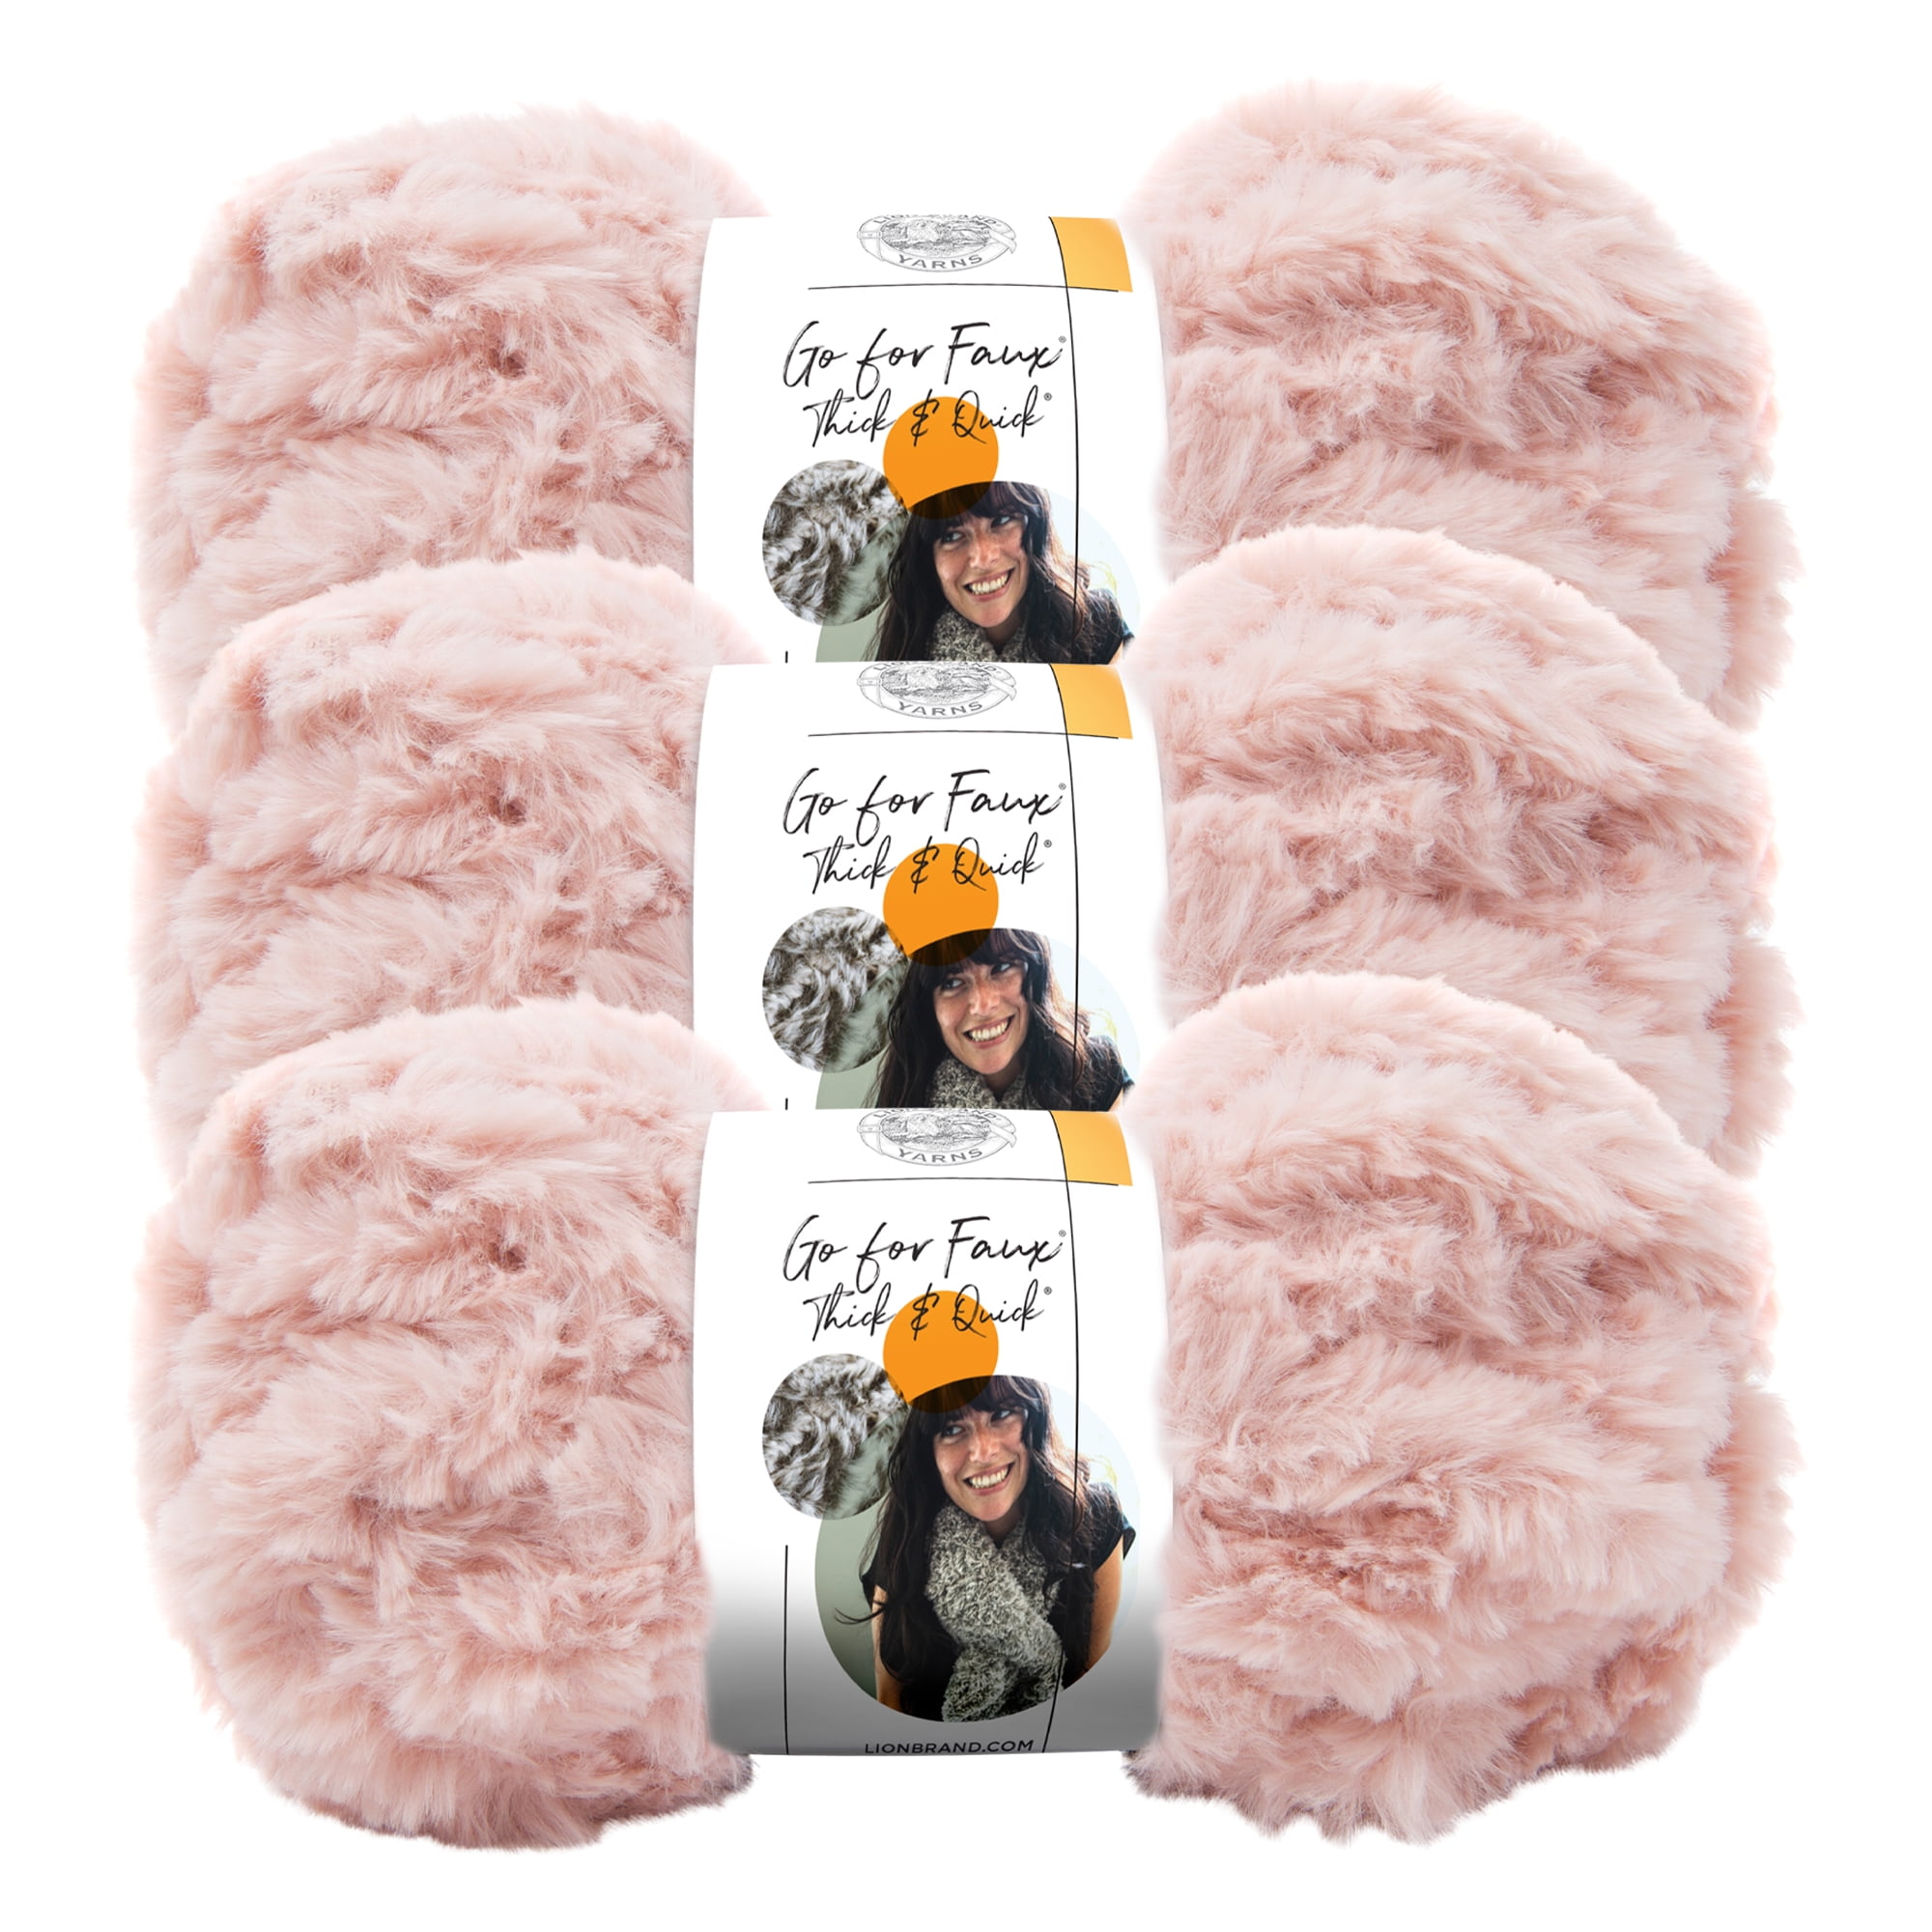 Lion Brand Yarn Go for Faux Thick and Quick Chinchilla Faux Fur